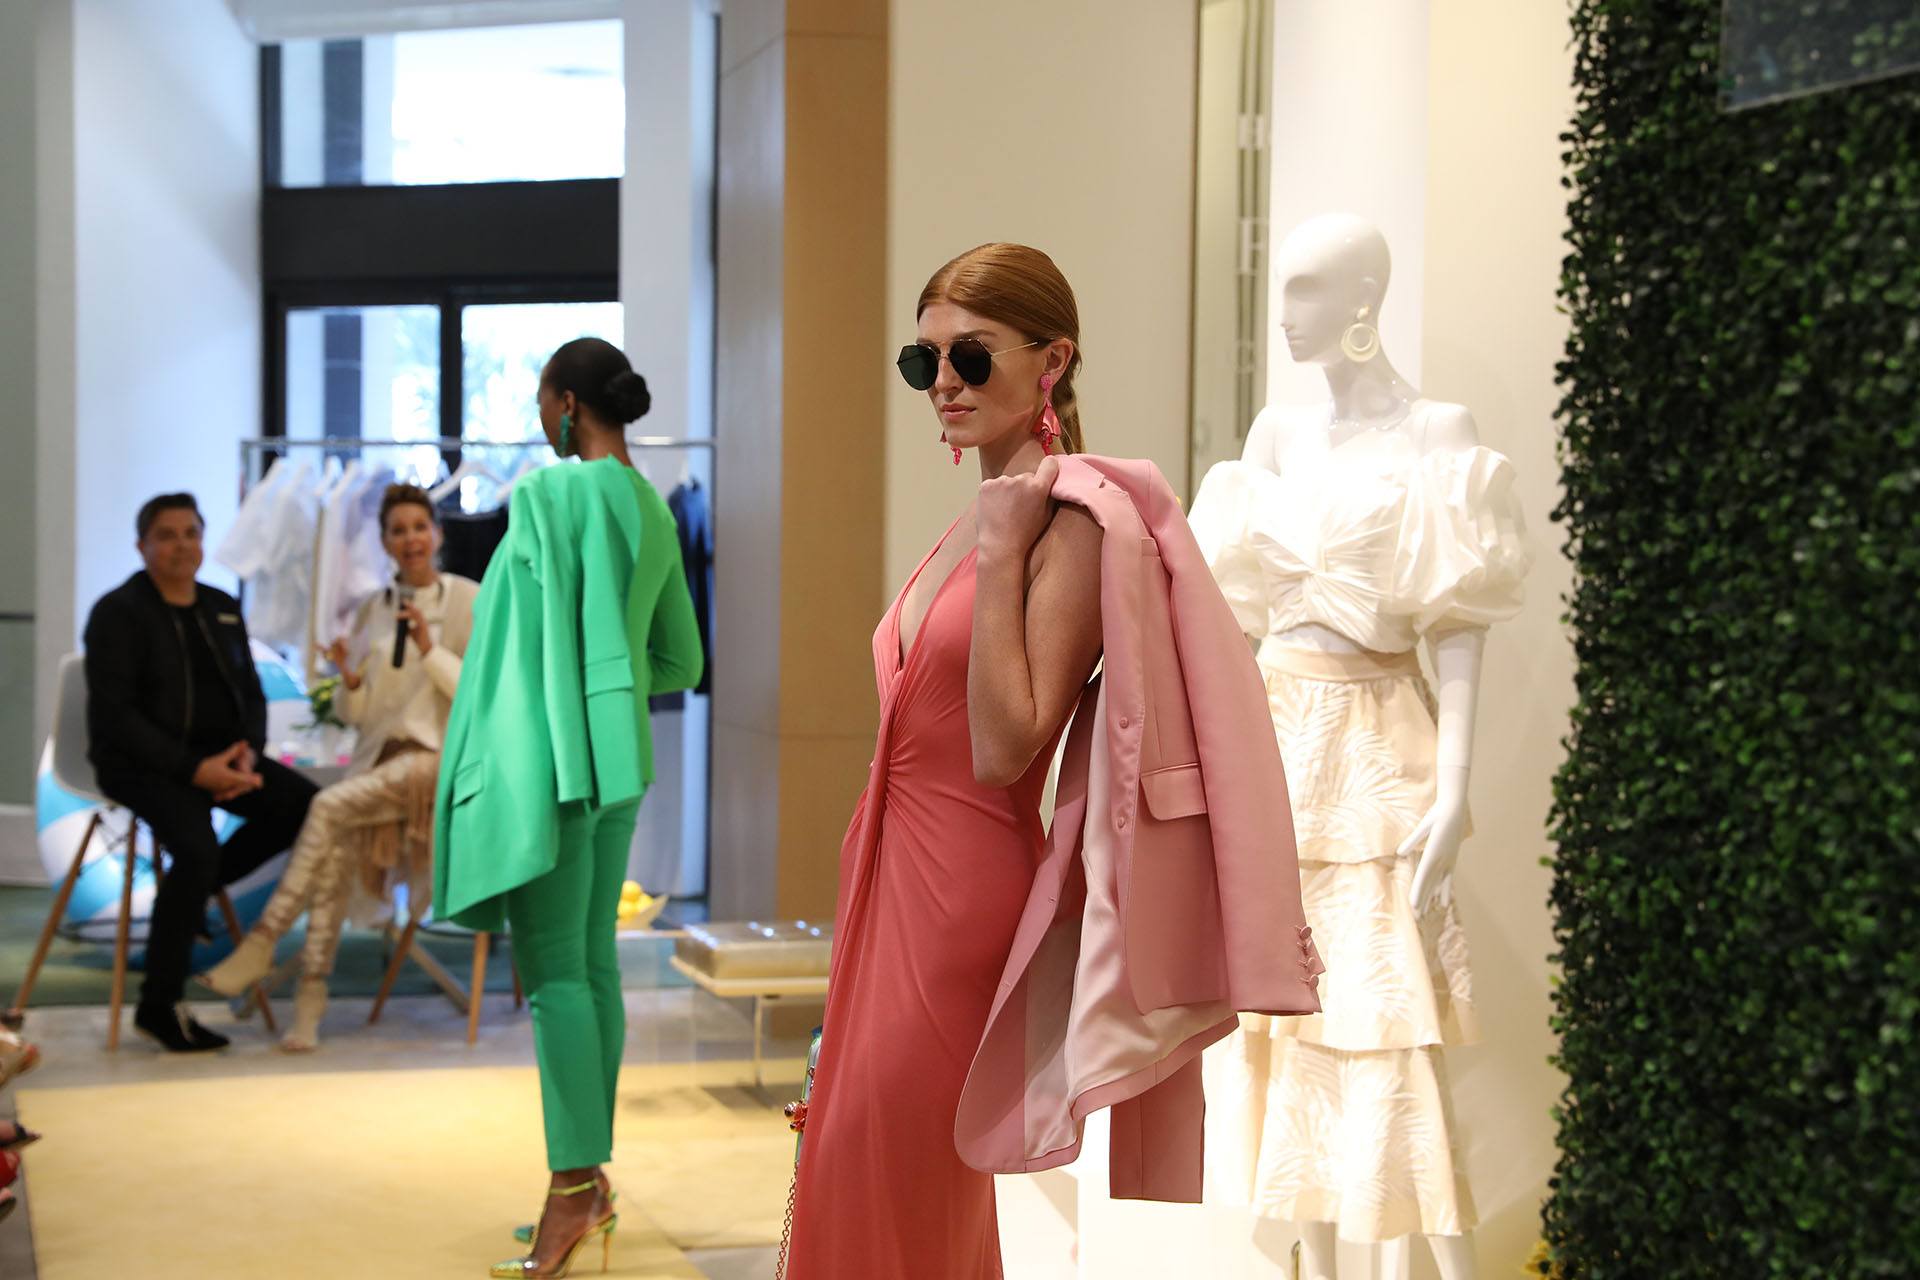 Models in the latest Spring 2019 collection from Neiman Marcus Bal Harbour